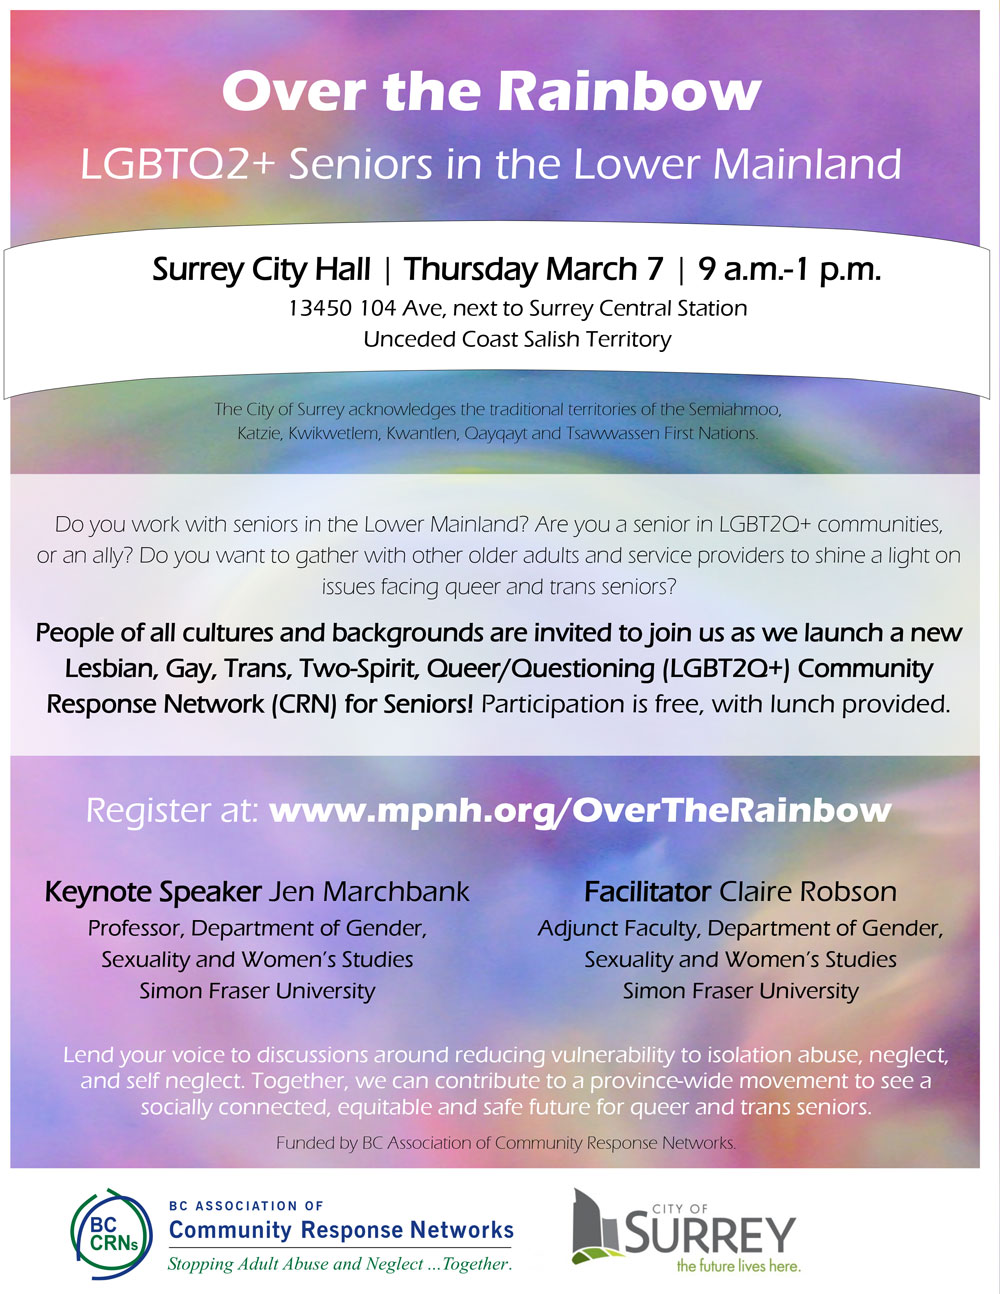 Event poster on a painted rainbow background, outlining the details listed above.